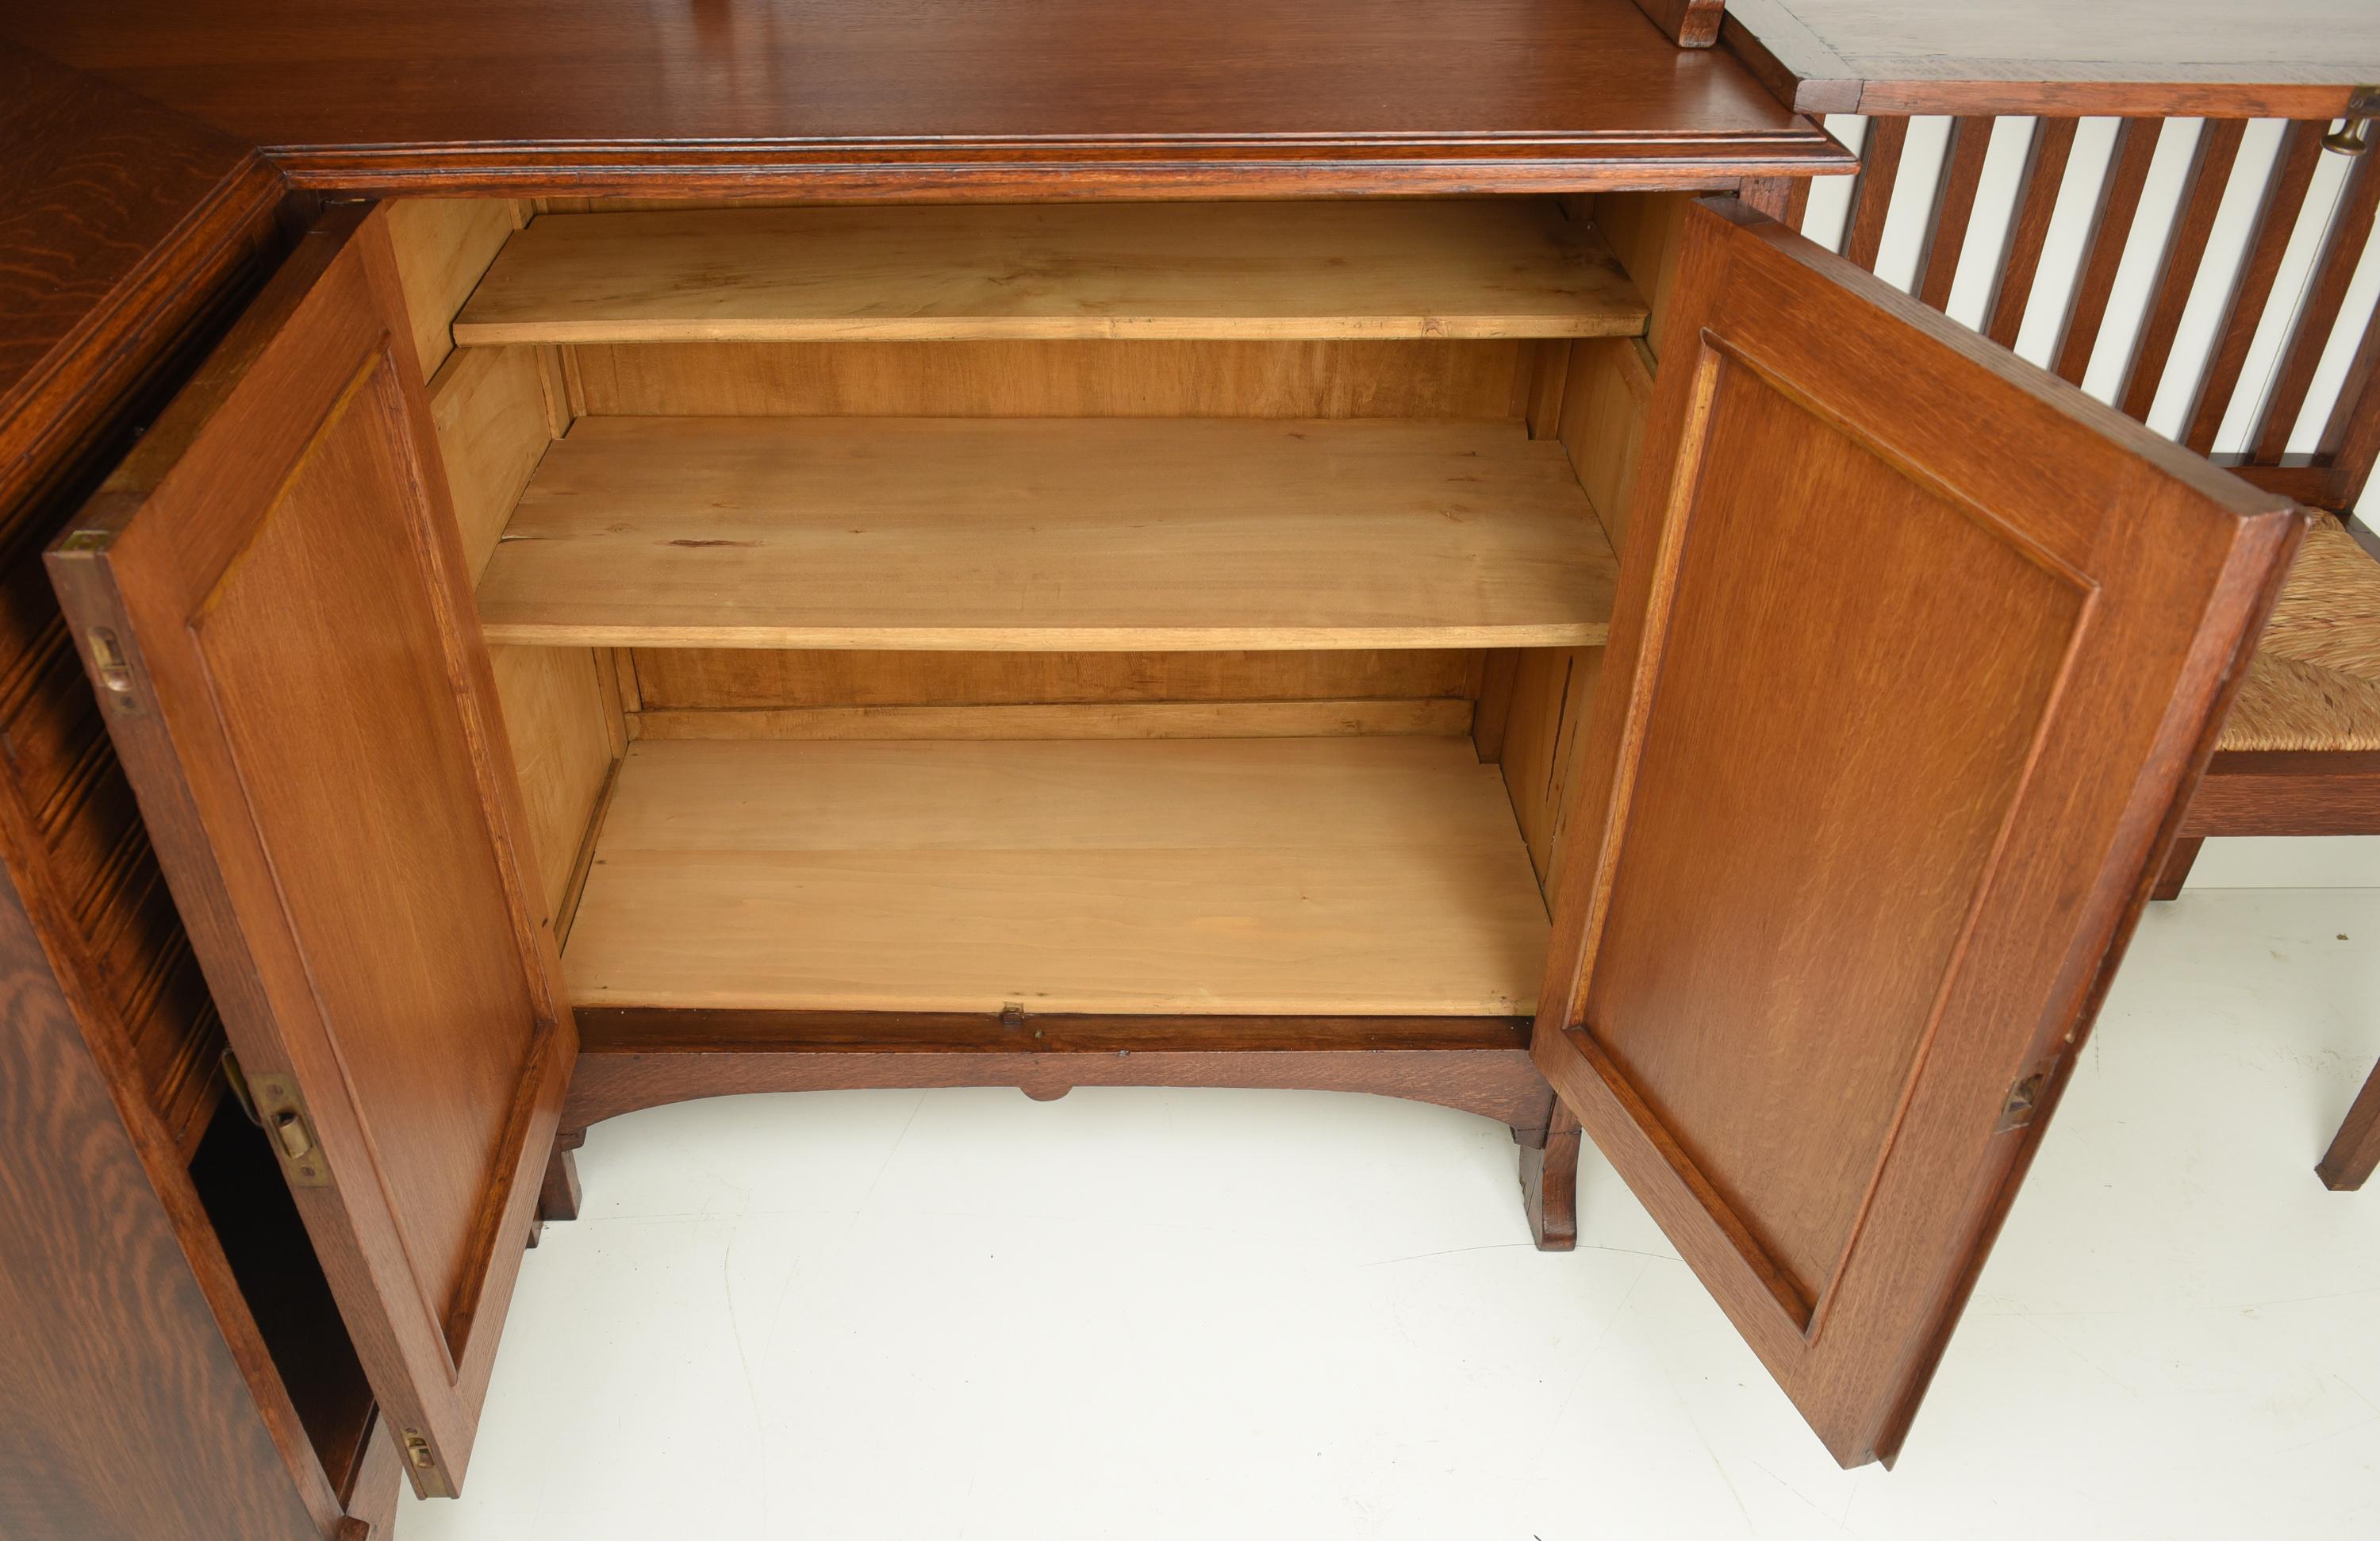 20th Century Art Nouveau Corner Cabinet with Bench in Oak by Albert Dumont, 1915 For Sale